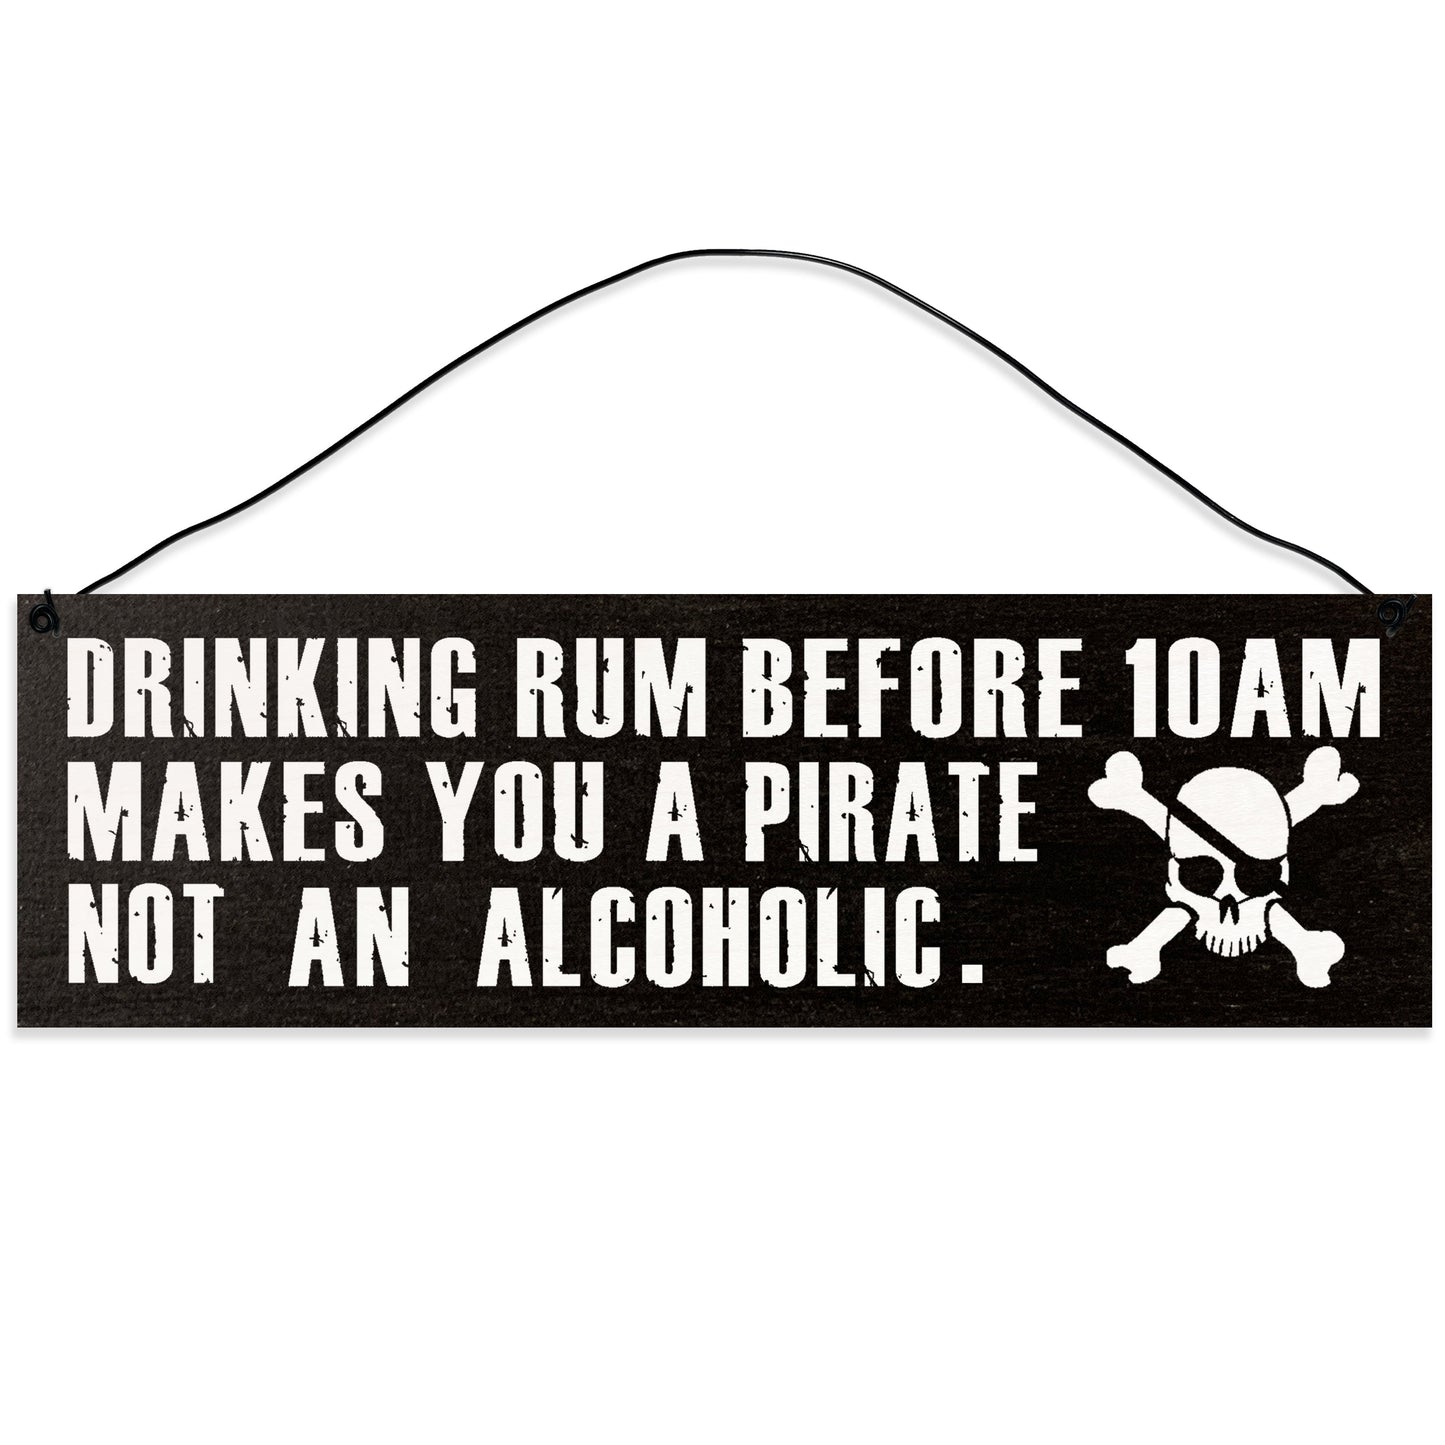 Sawyer's Mill - Drinking Rum Before 10AM makes you a Pirate. Wood Sign for Home or Office. Measures 3x10 inches.